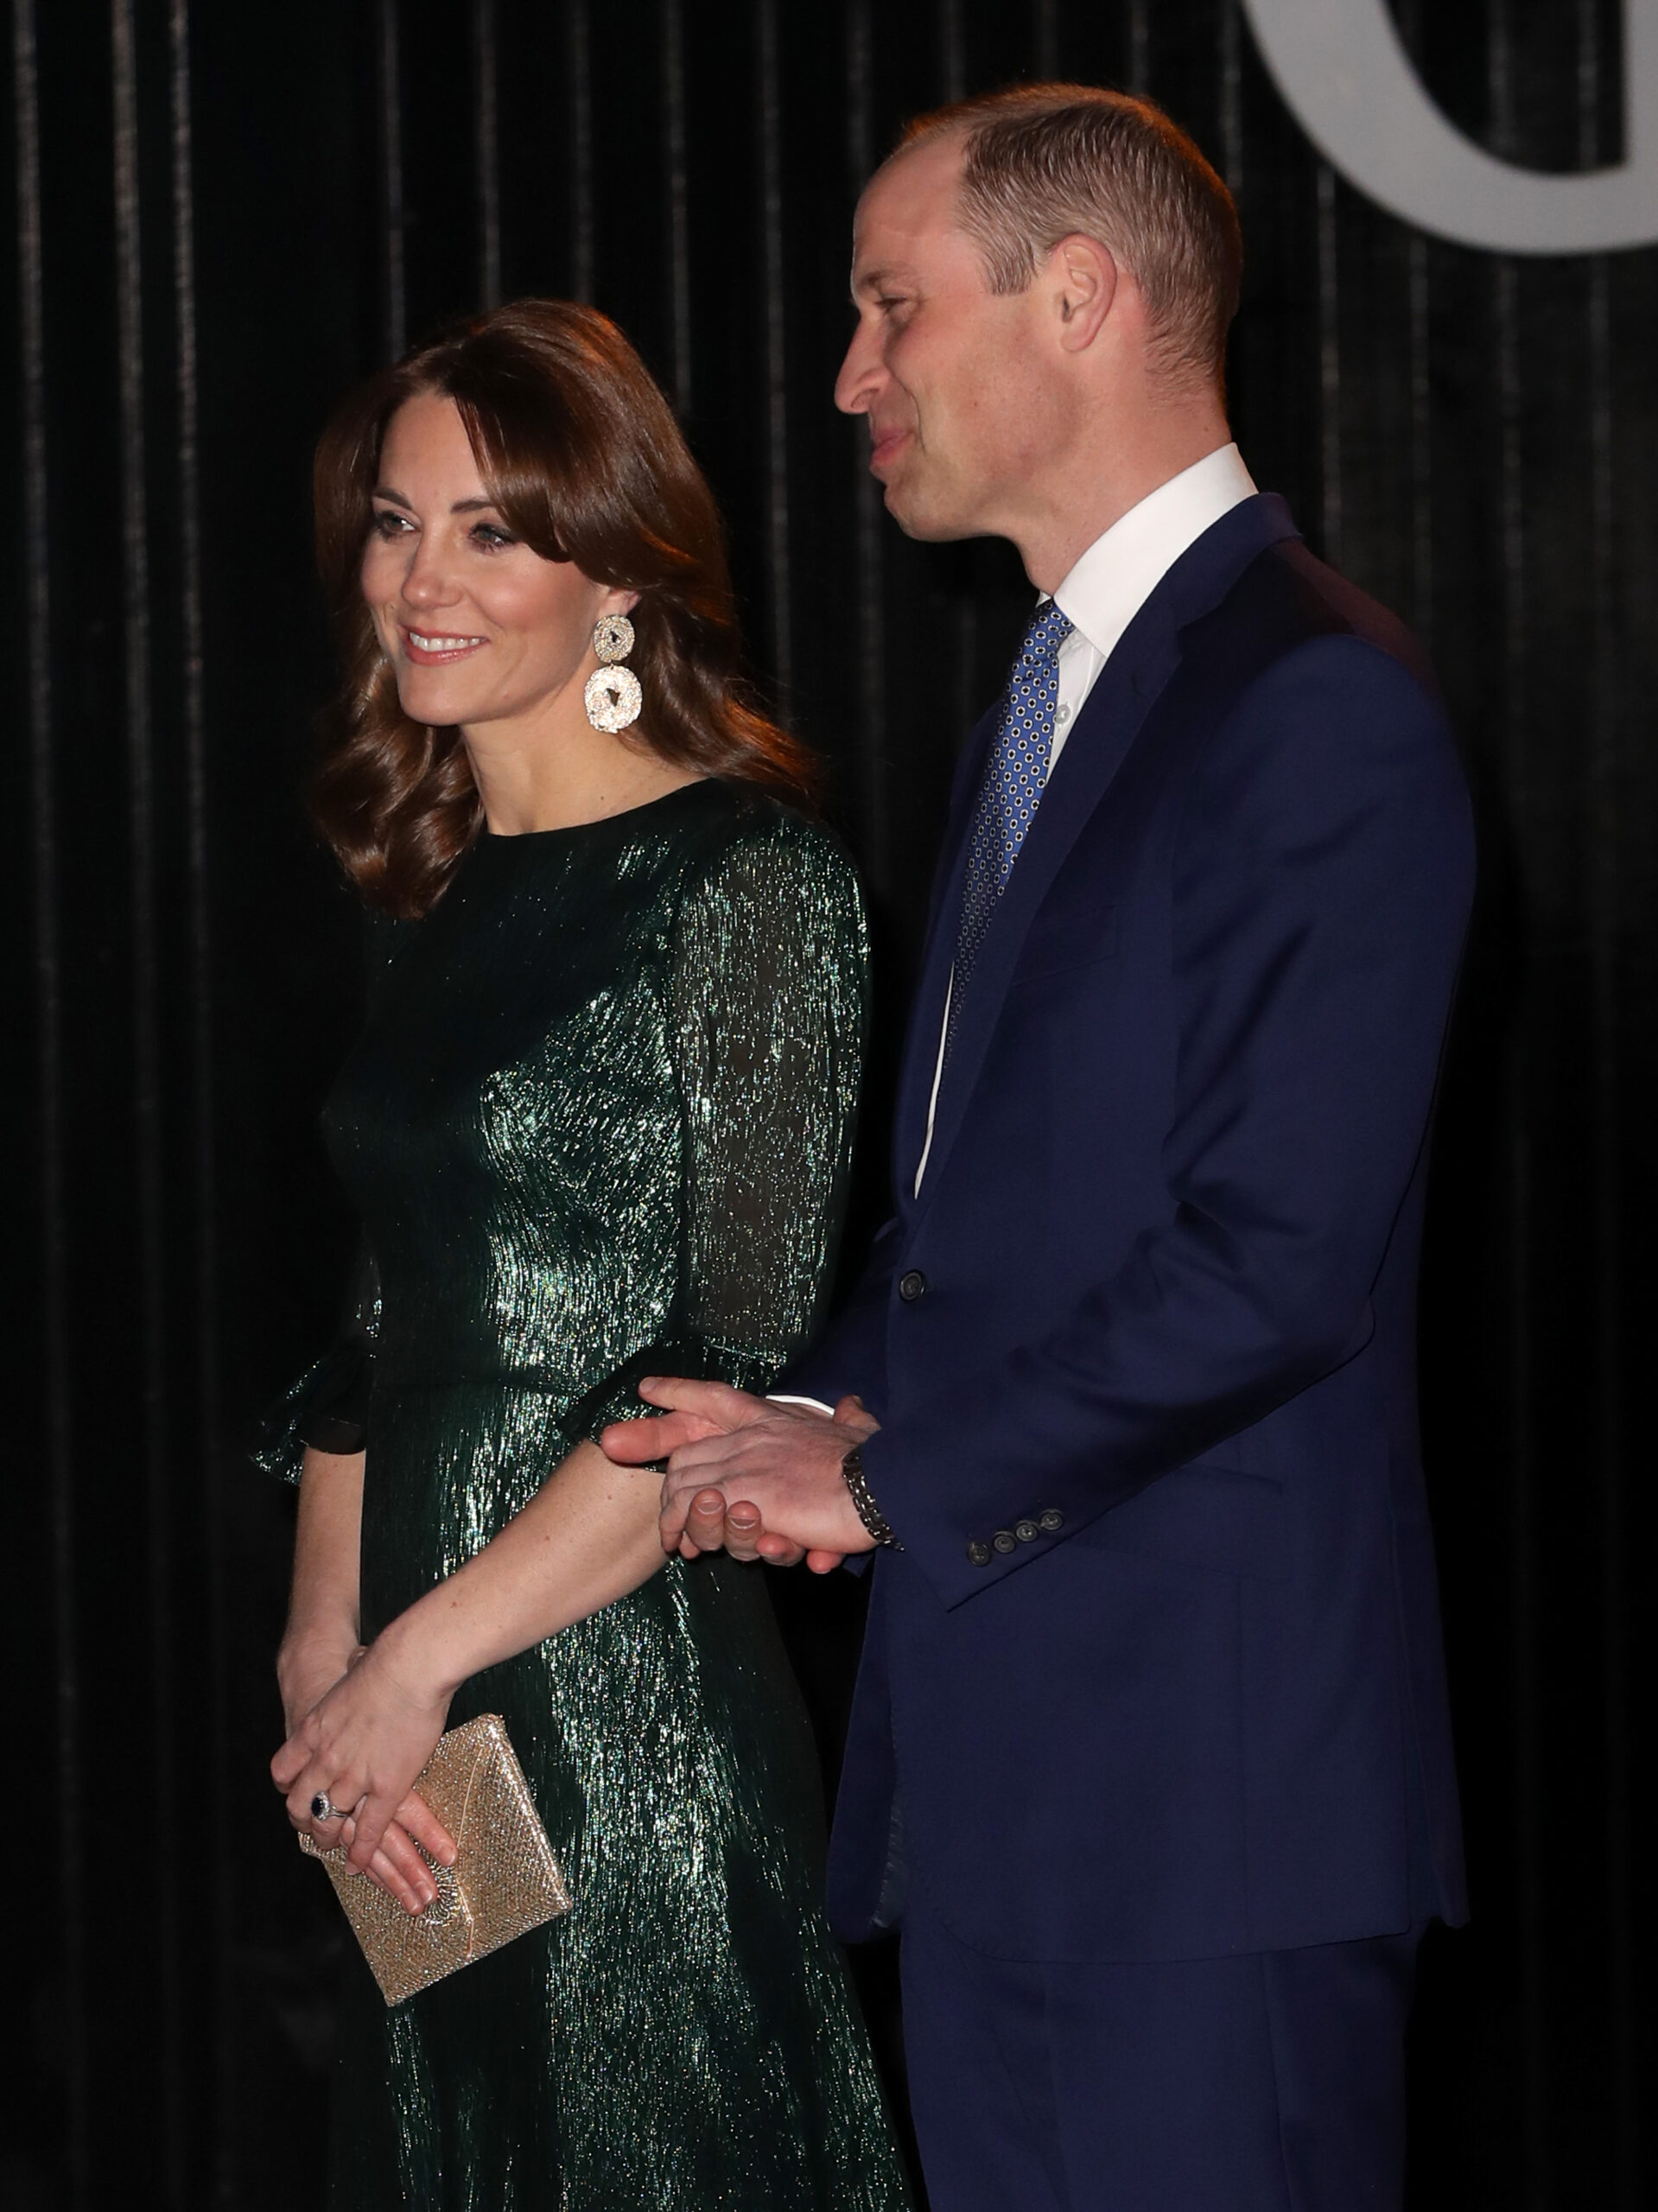 Kate Middleton wears a showstopping green dress at Ireland soiree